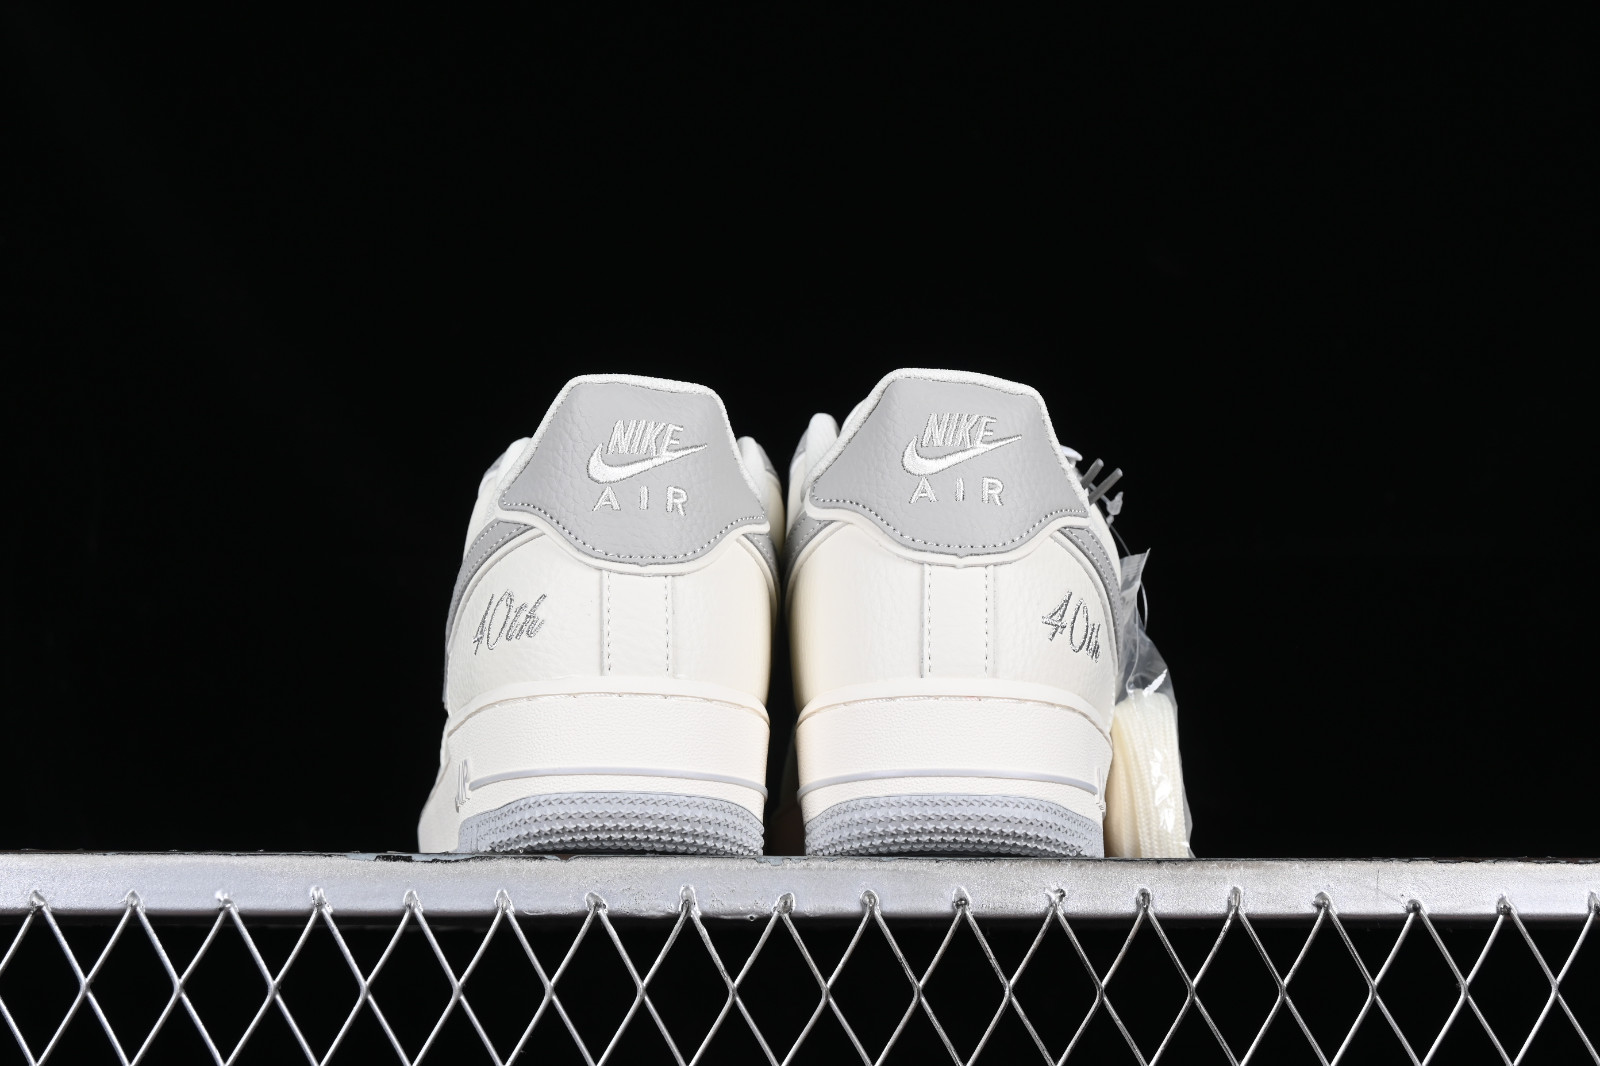 off white air force 1 grey